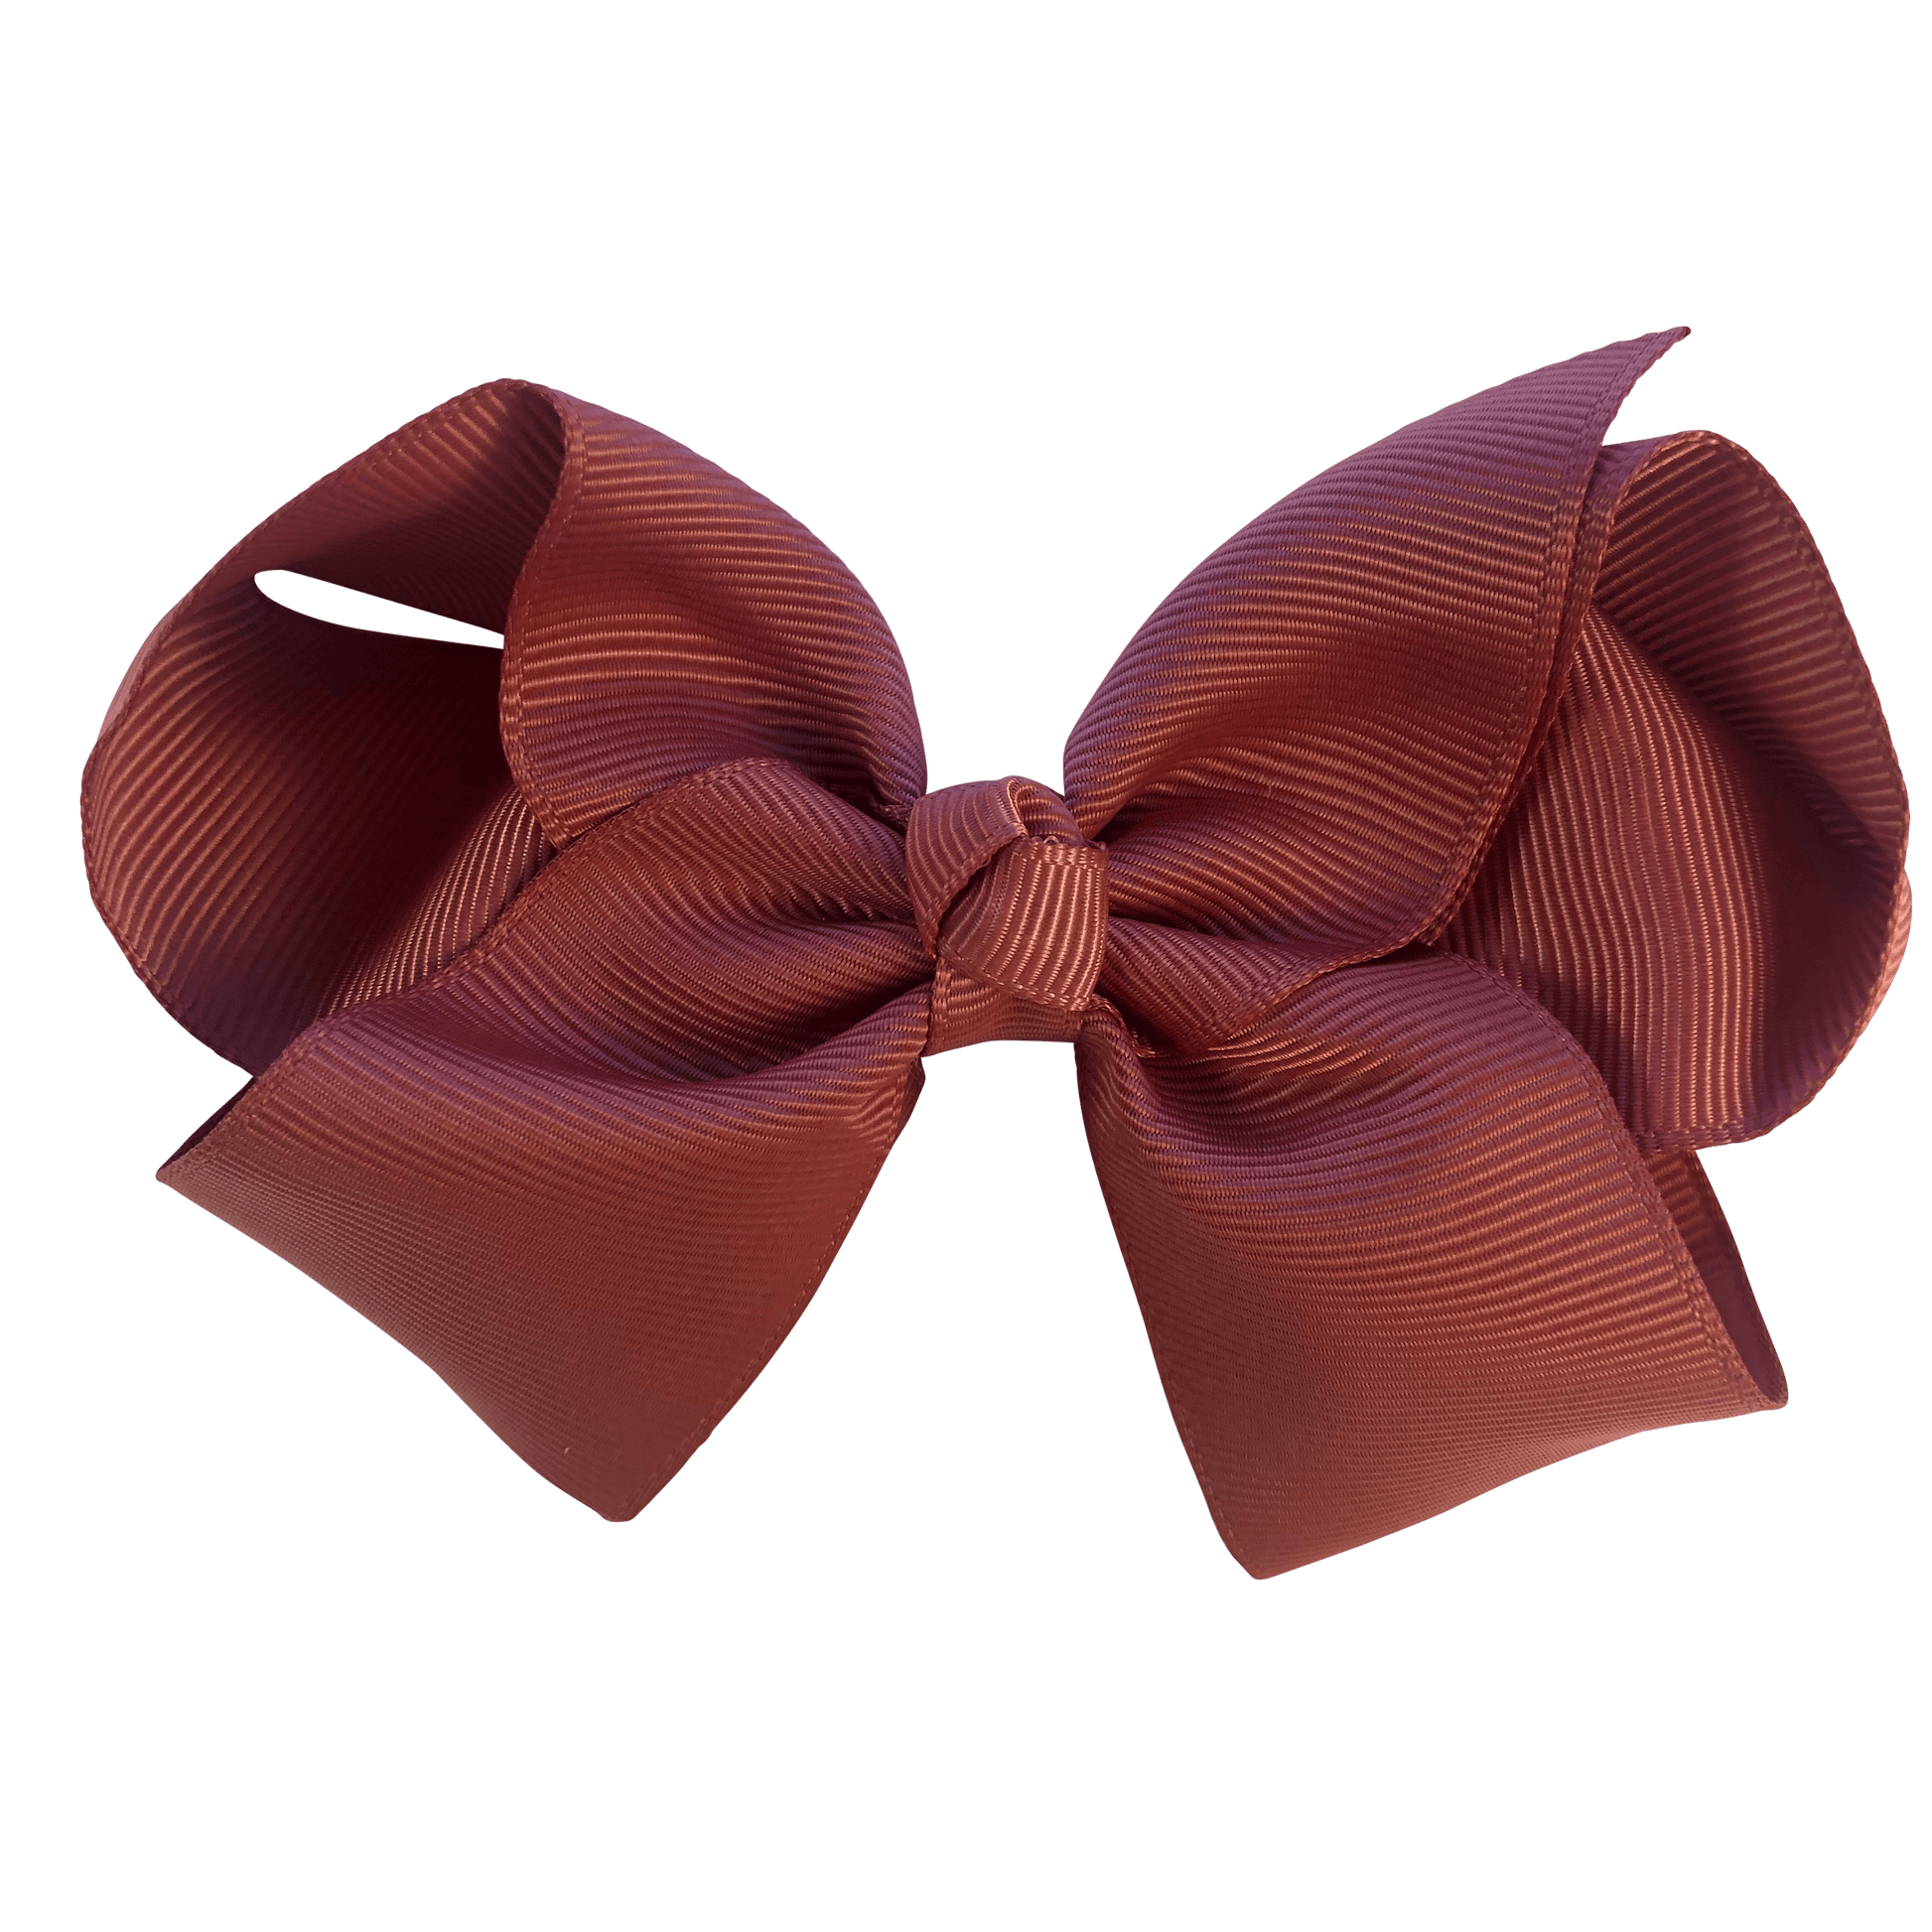 Big Sister / Little Sister Big Bow - Hair clips - School Uniform Hair Accessories - Ponytails and Fairytales